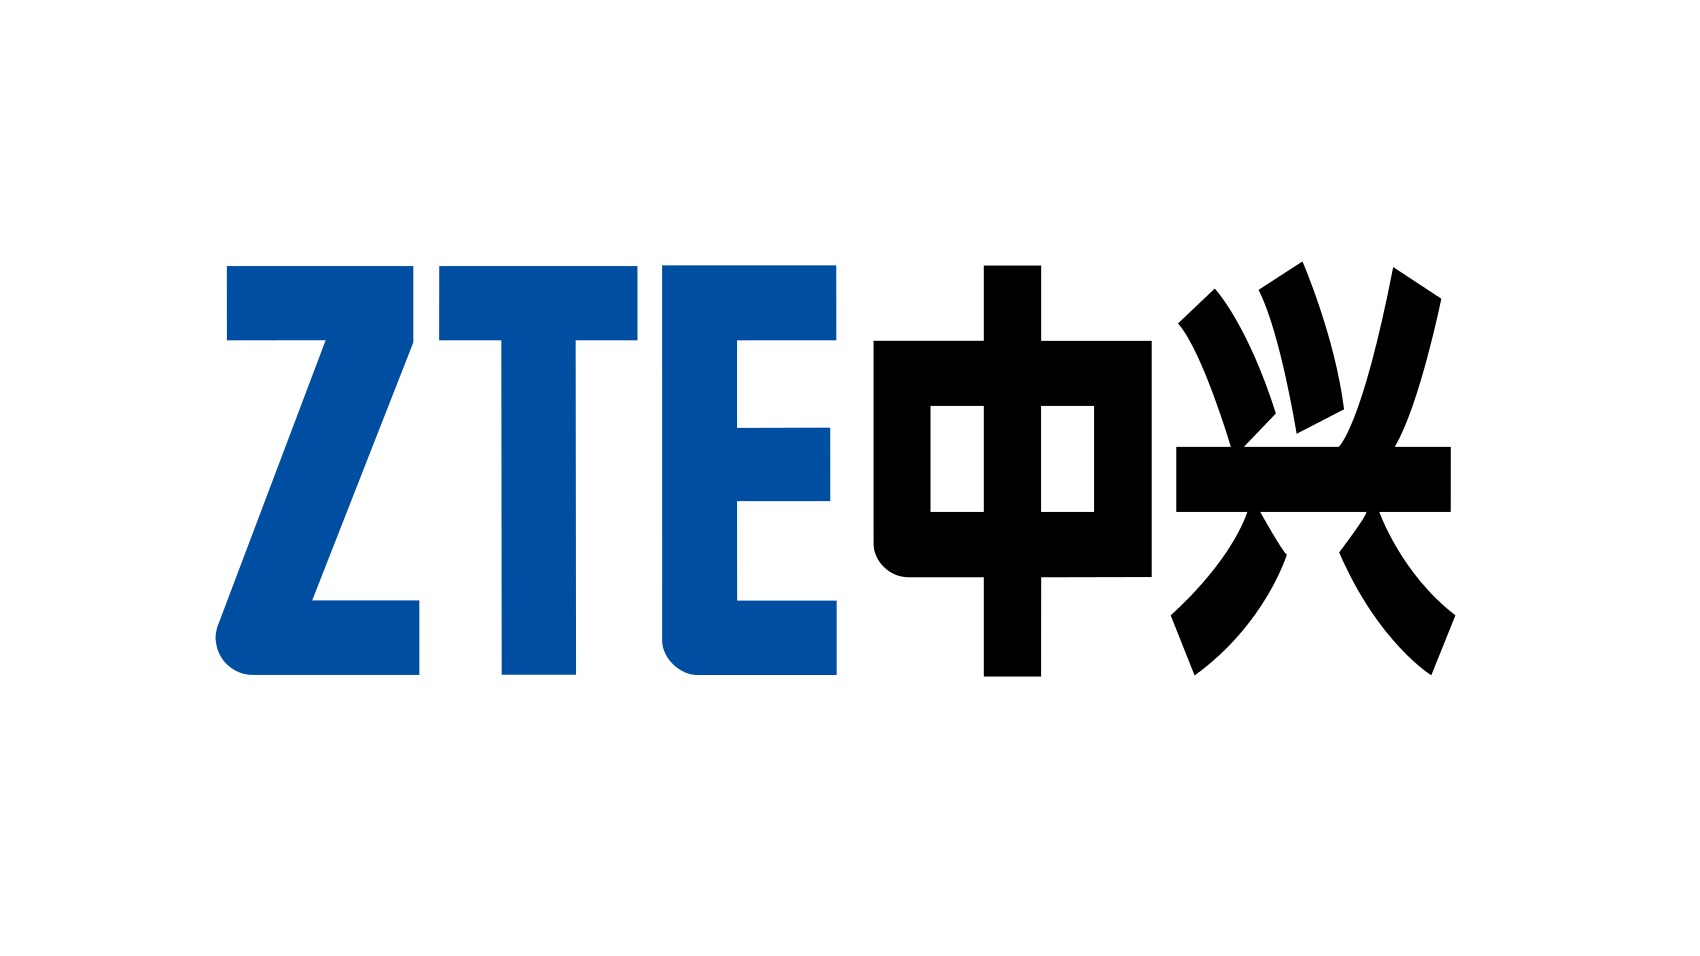 5g ready zte gigabit phone launched at mwc 2017